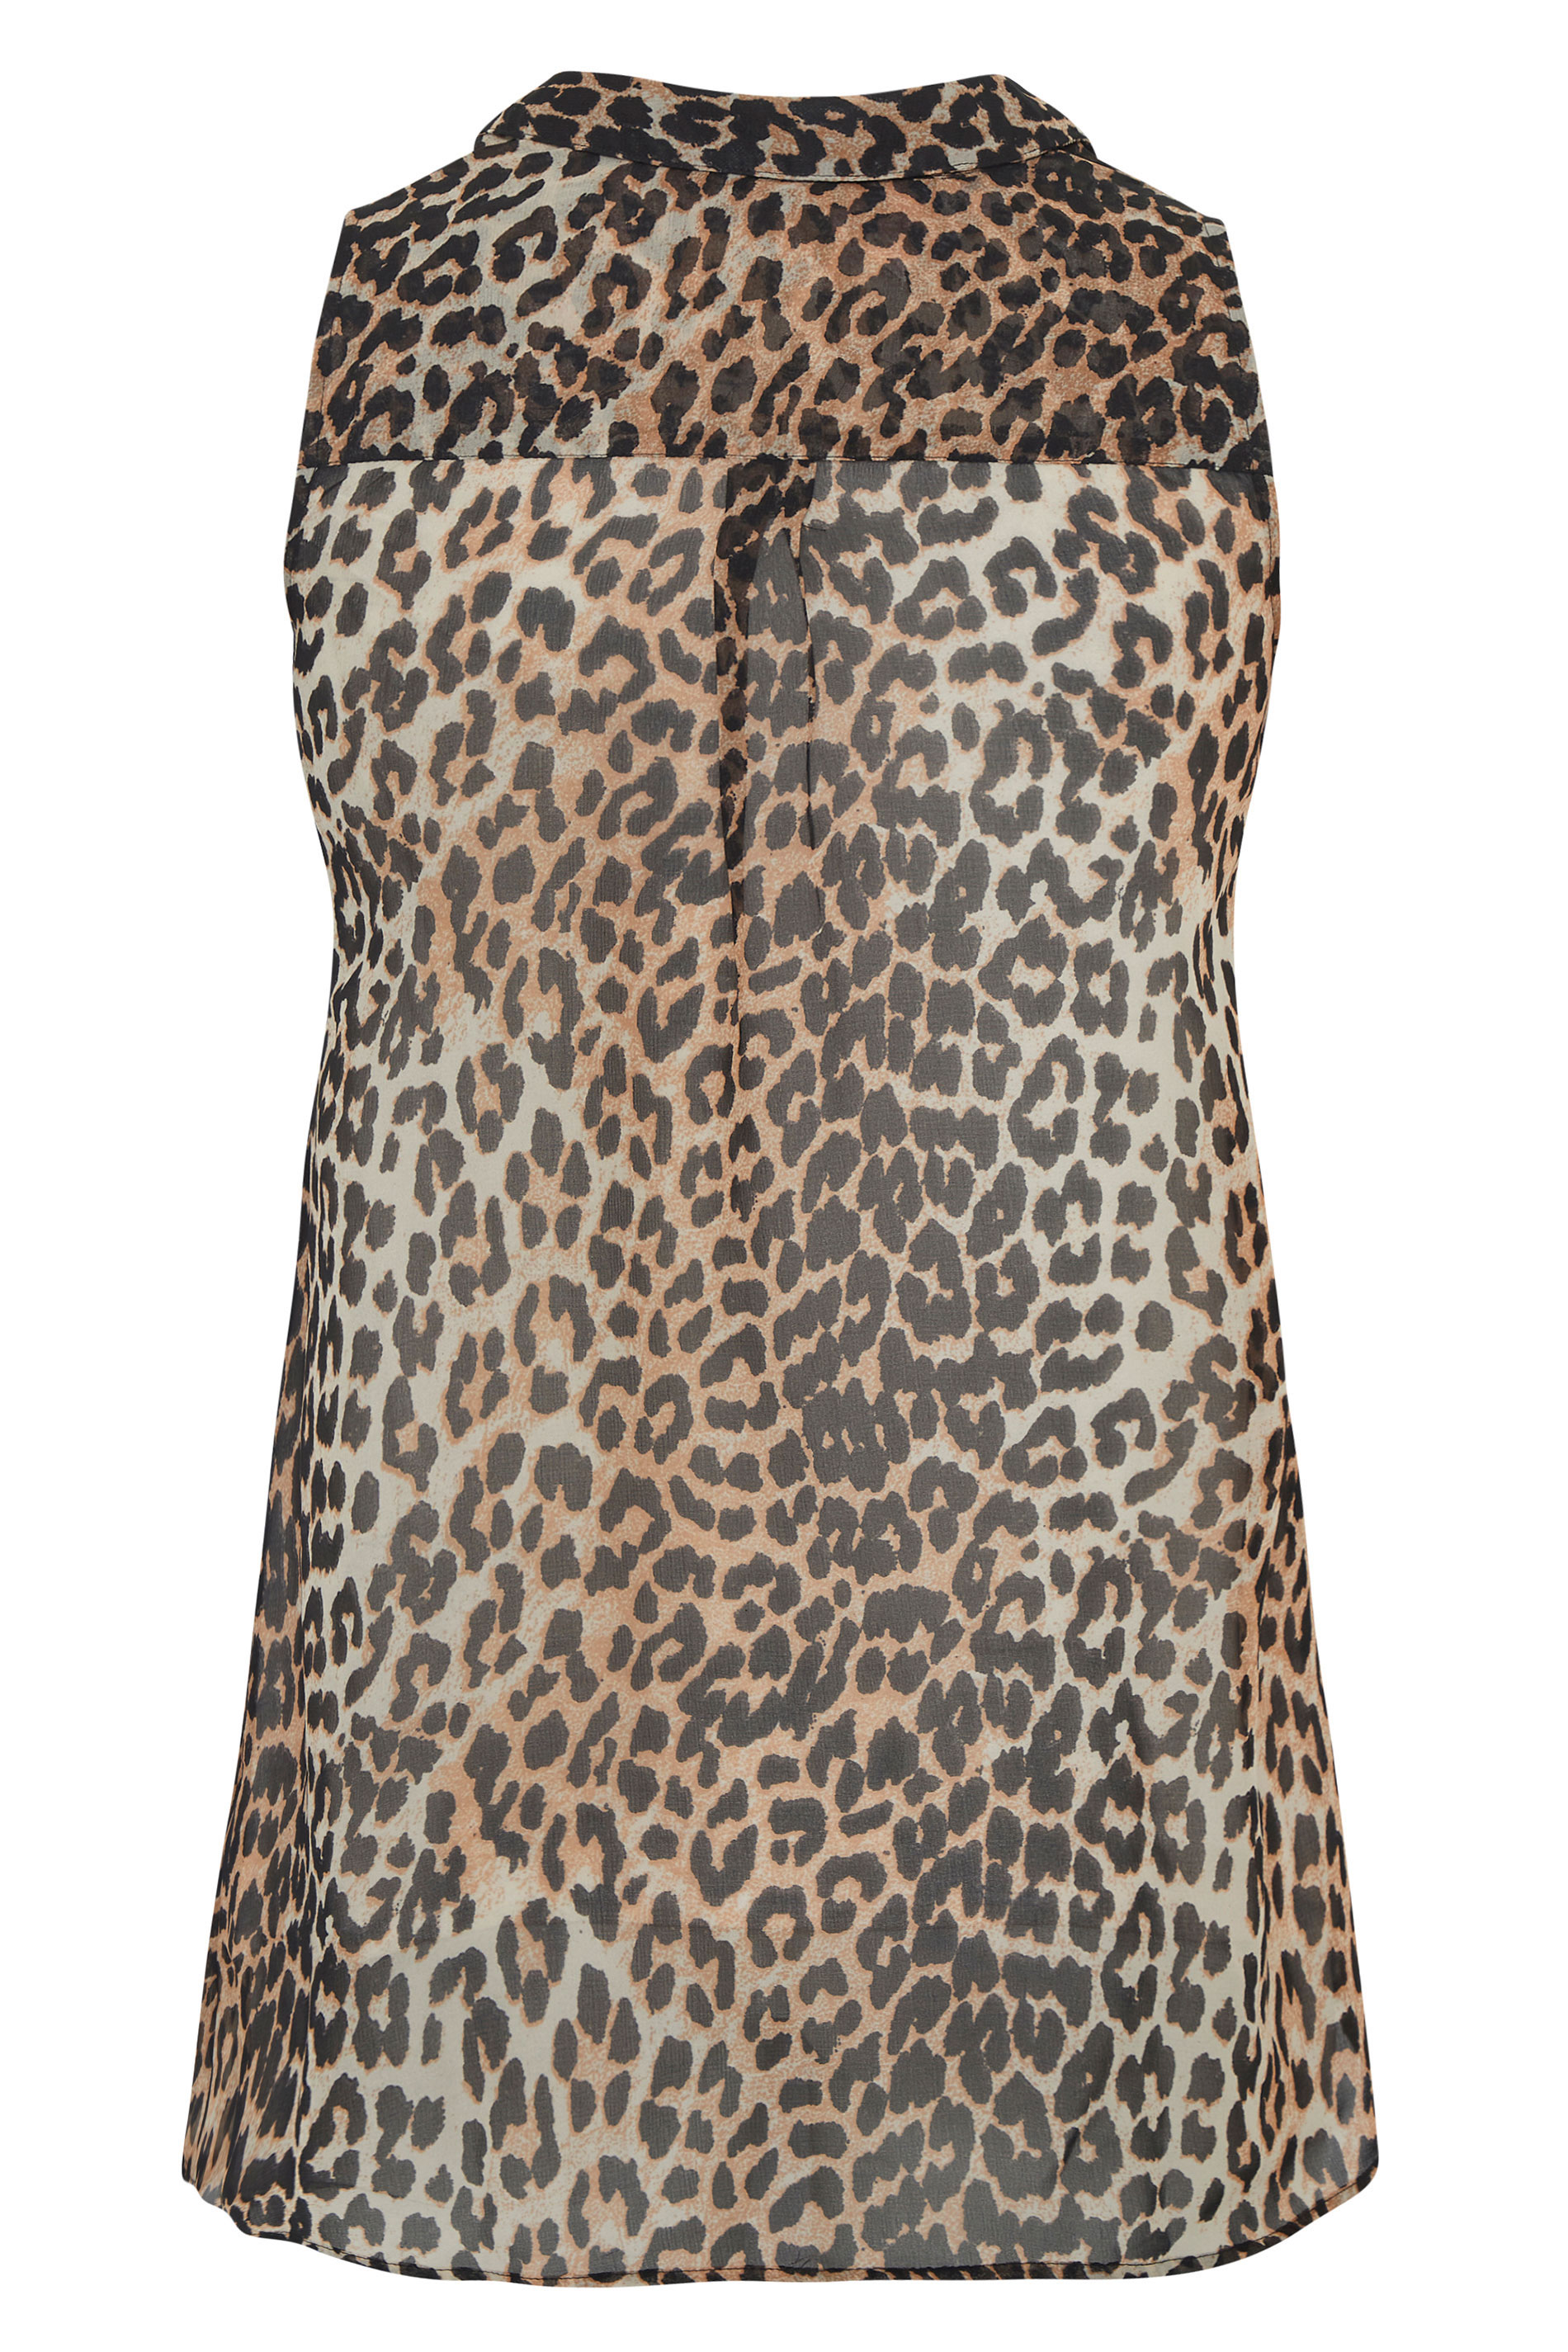 Leopard Print Frill Front Sleeveless Shirt | Yours Clothing